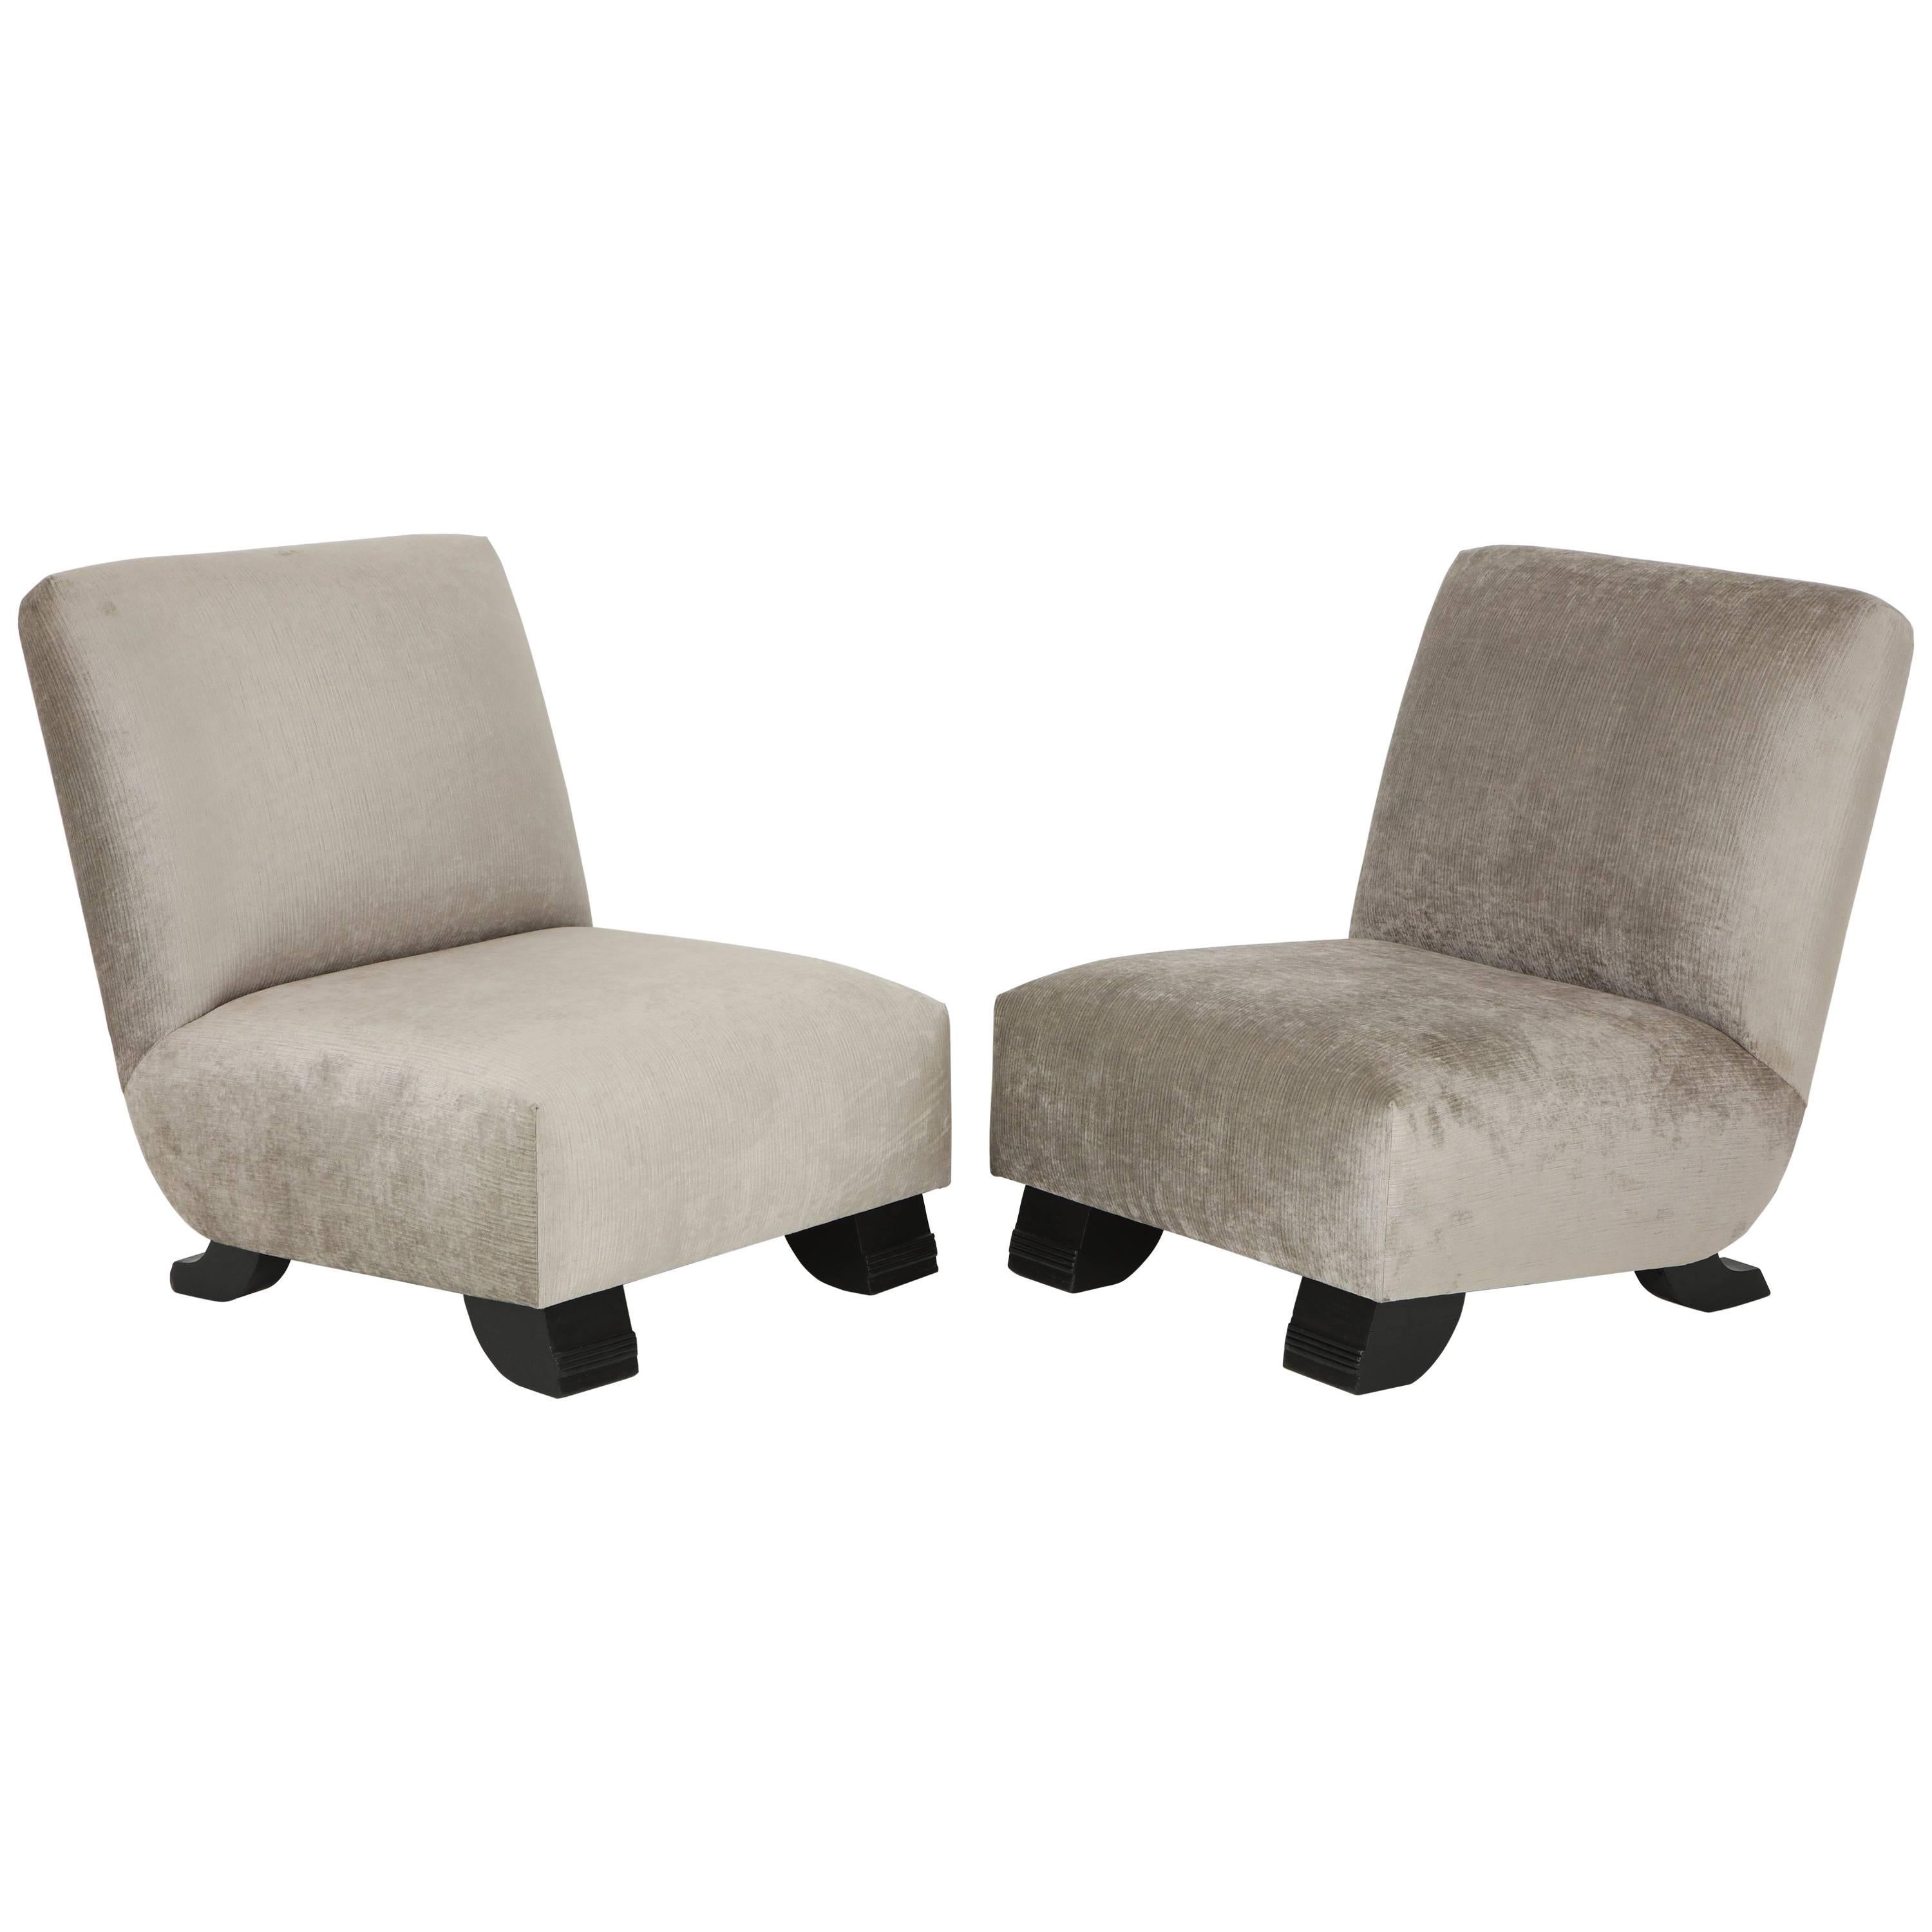 Elegant Pair of Slipper Chairs by James Mont